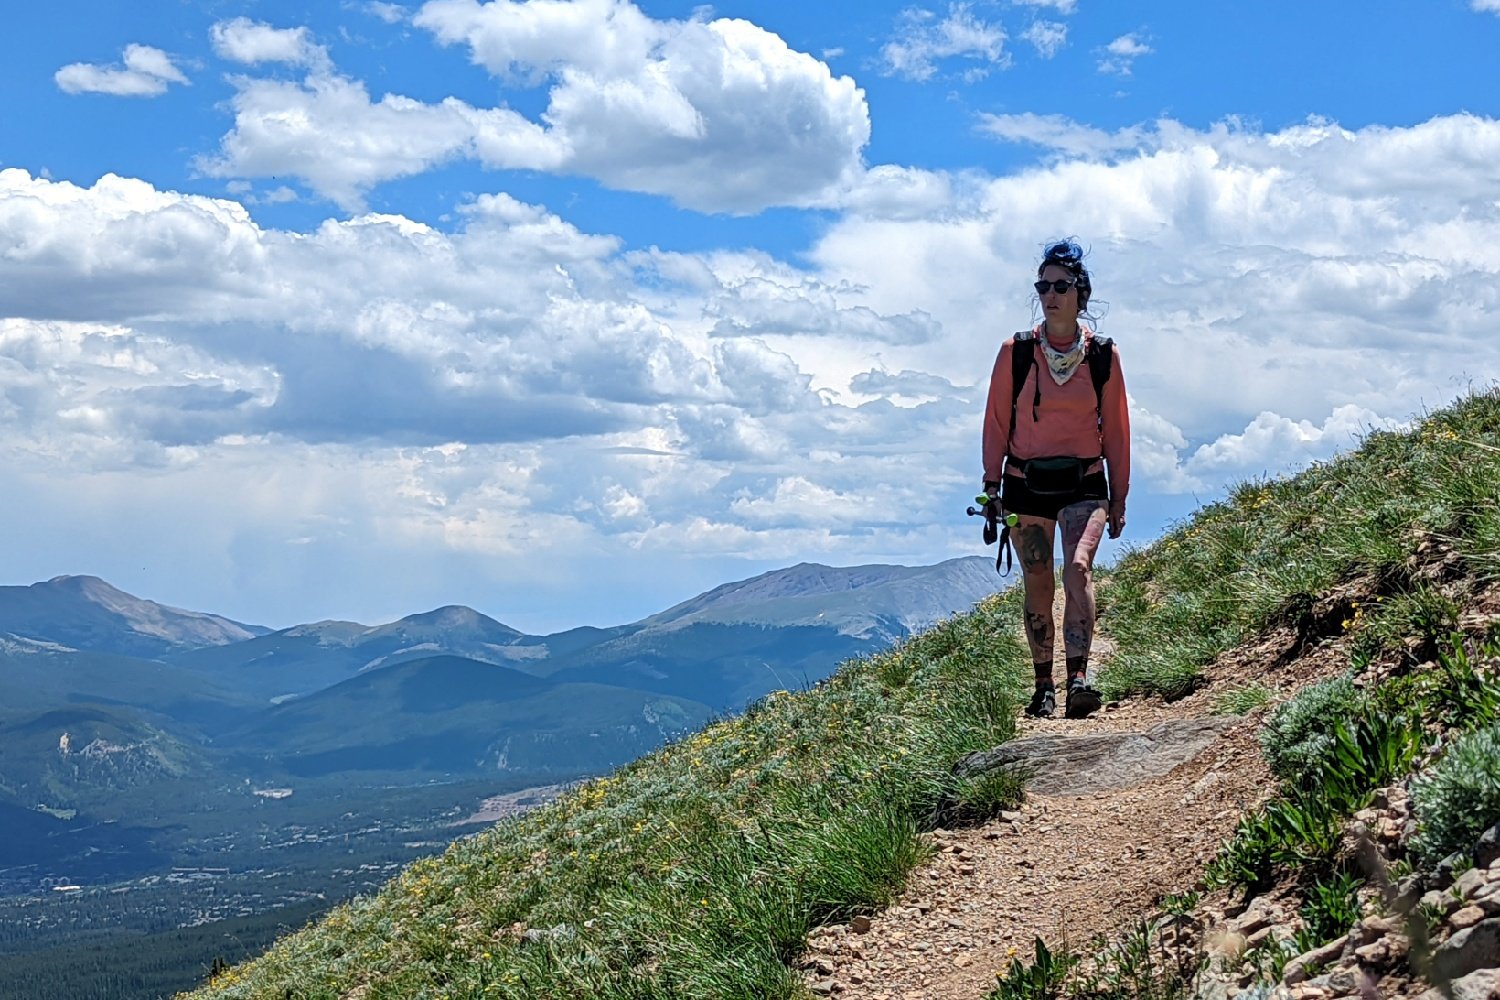 A hiker on the Colorado Trail with mountains in the background